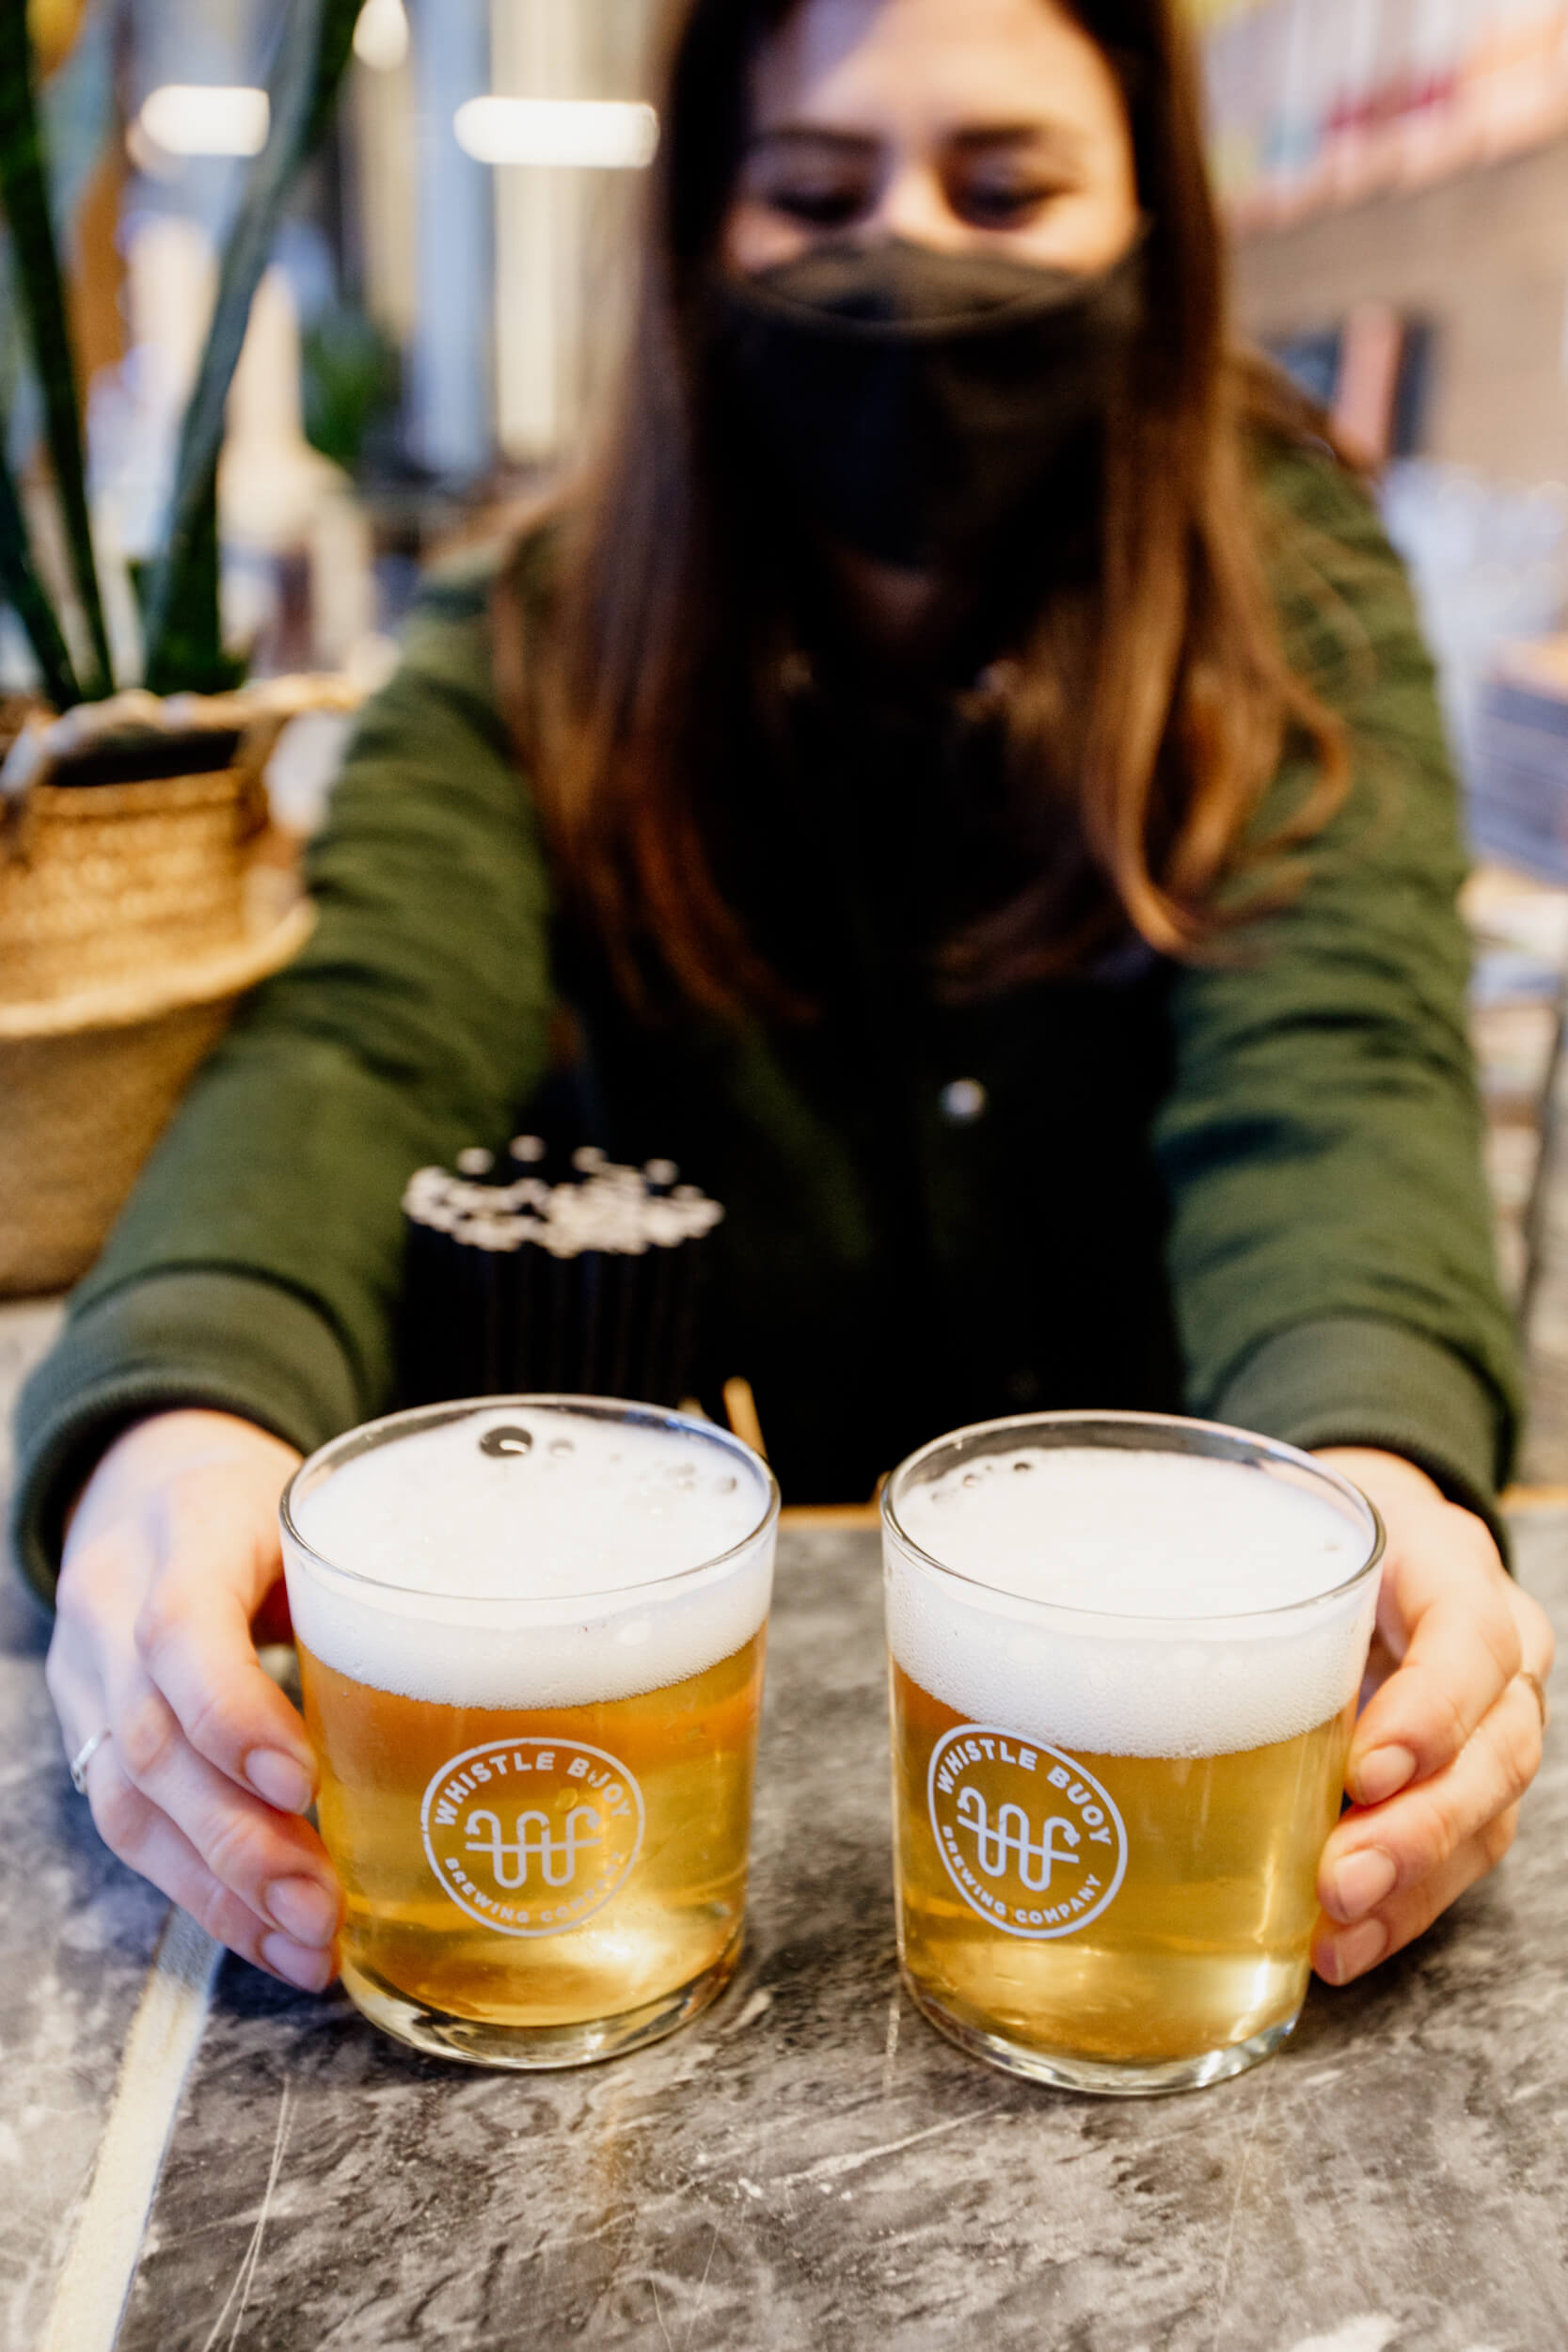 Nina, co-owner of Whistle Buoy Brewing in Victoria, BC, serves up two glasses of beer.